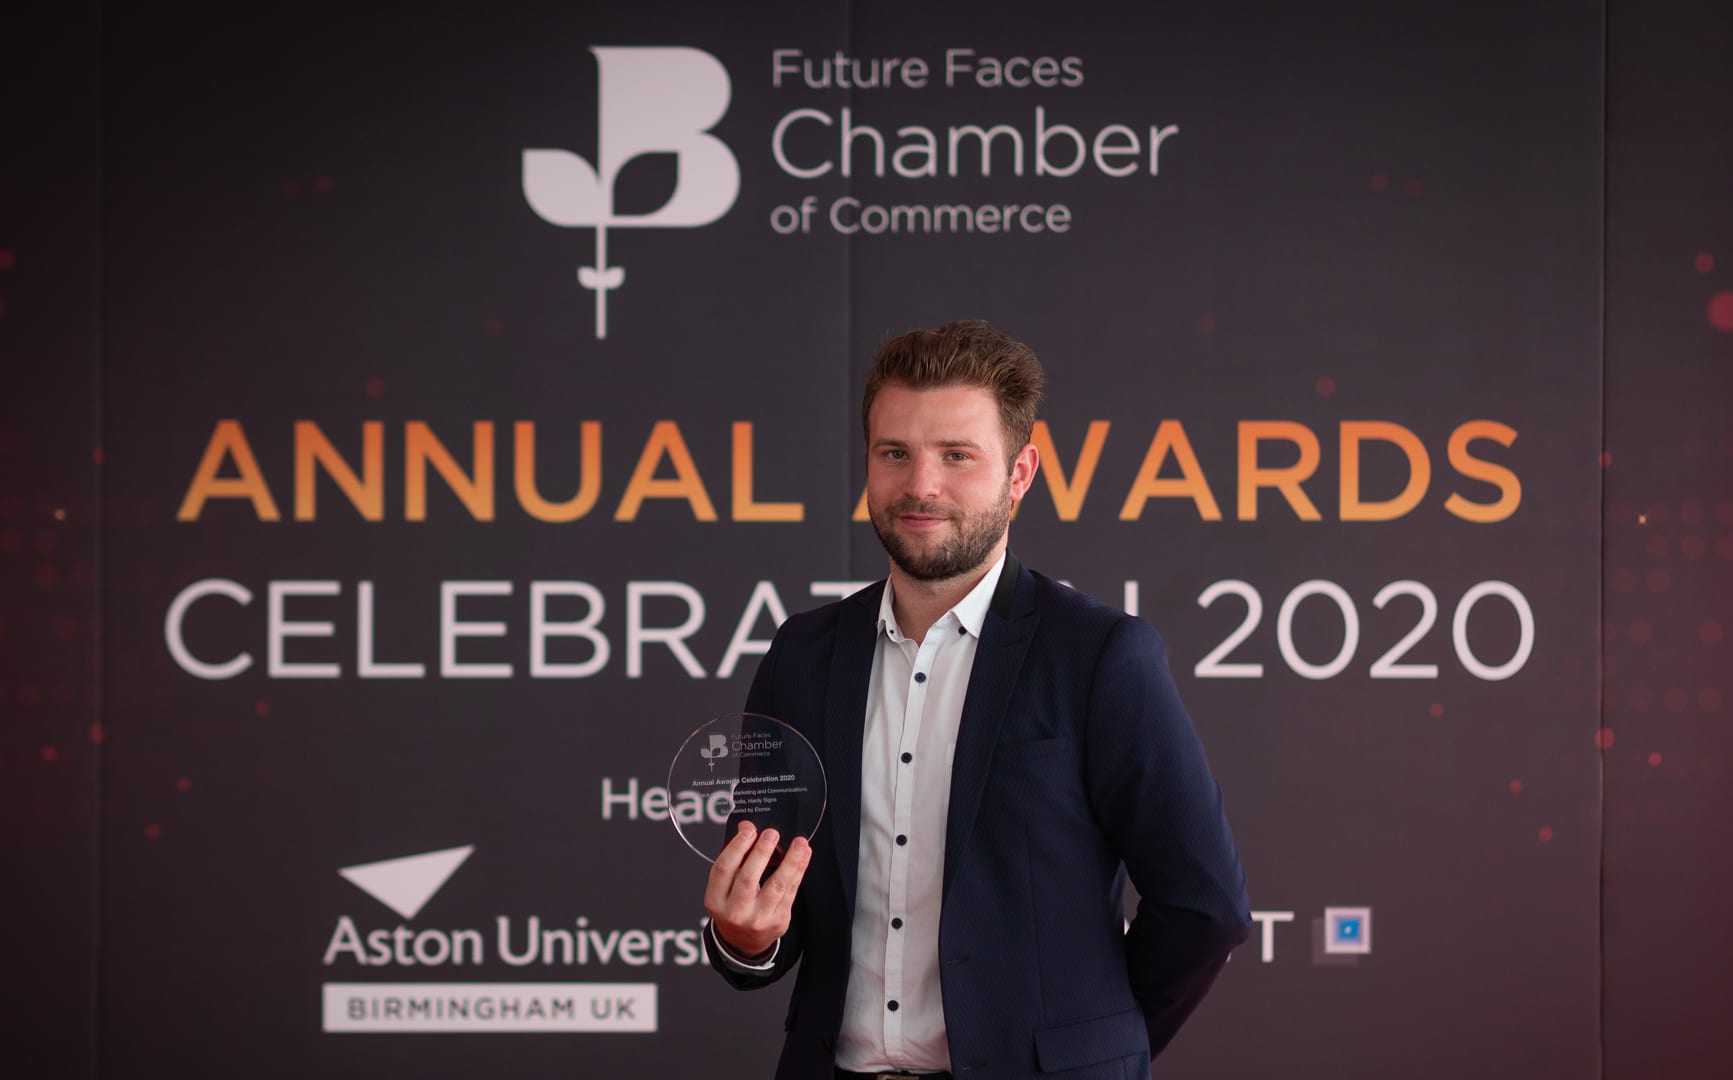 Daniel Nikolla, 27, has been named the Future Face of Sales, Marketing and Communications in the Future Faces Awards 2020